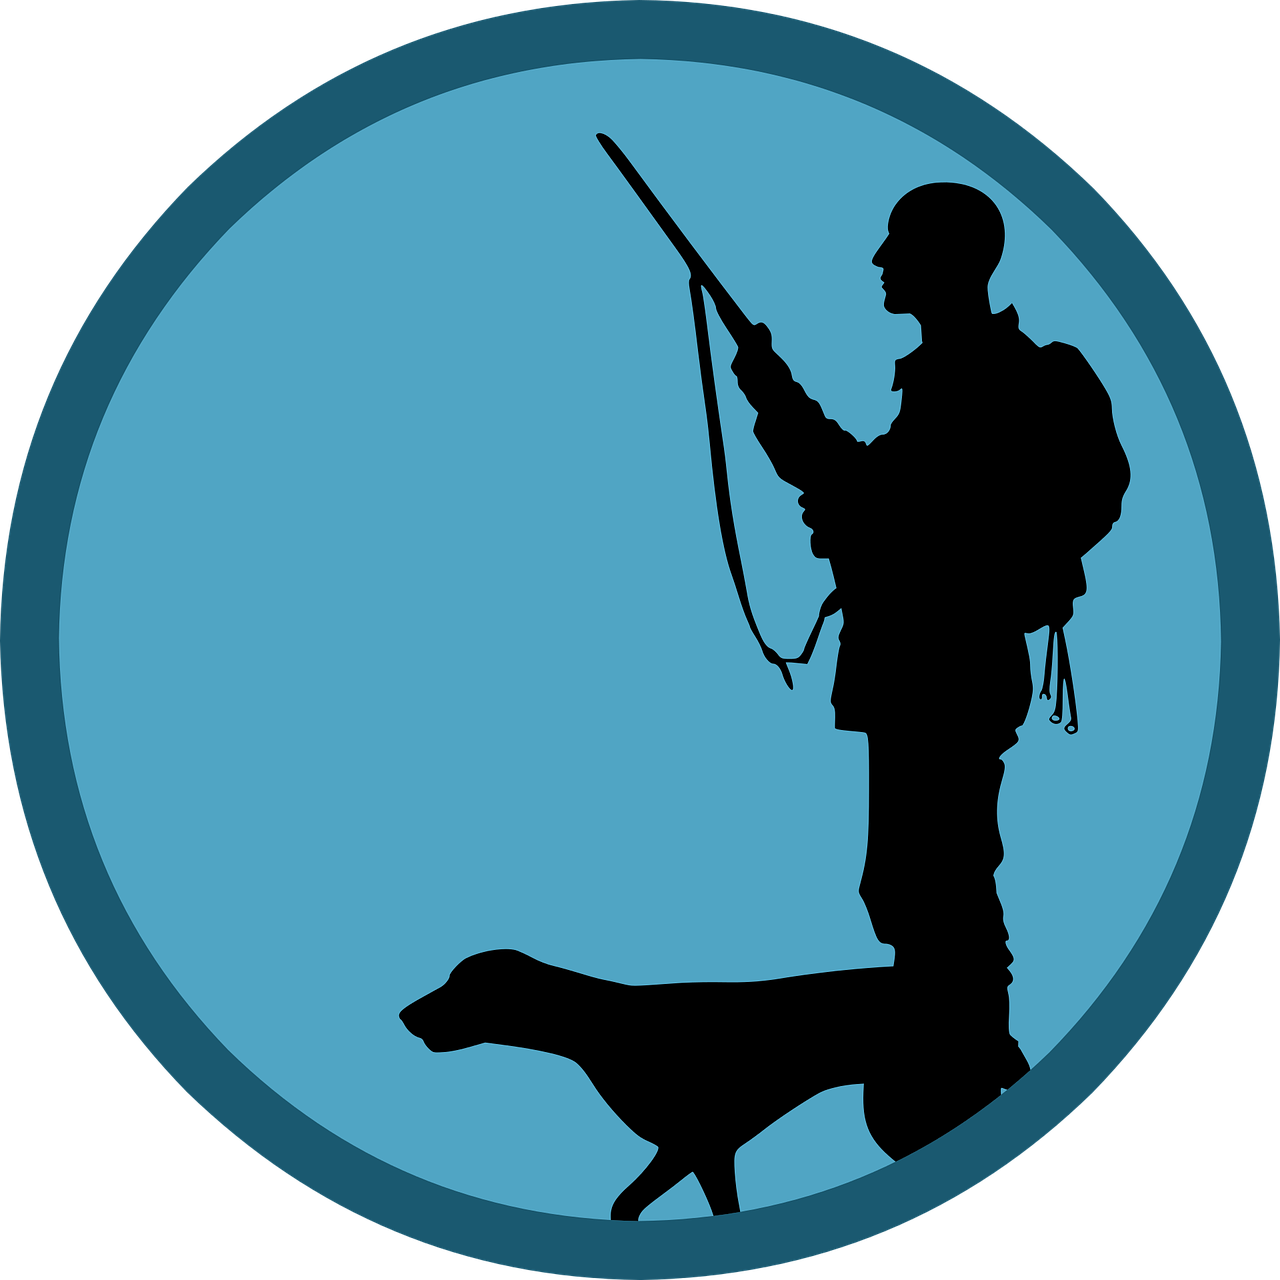 a silhouette of a man with a gun and a dog, an illustration of, sots art, with a blue background, military soldier behavior, round logo, hunting